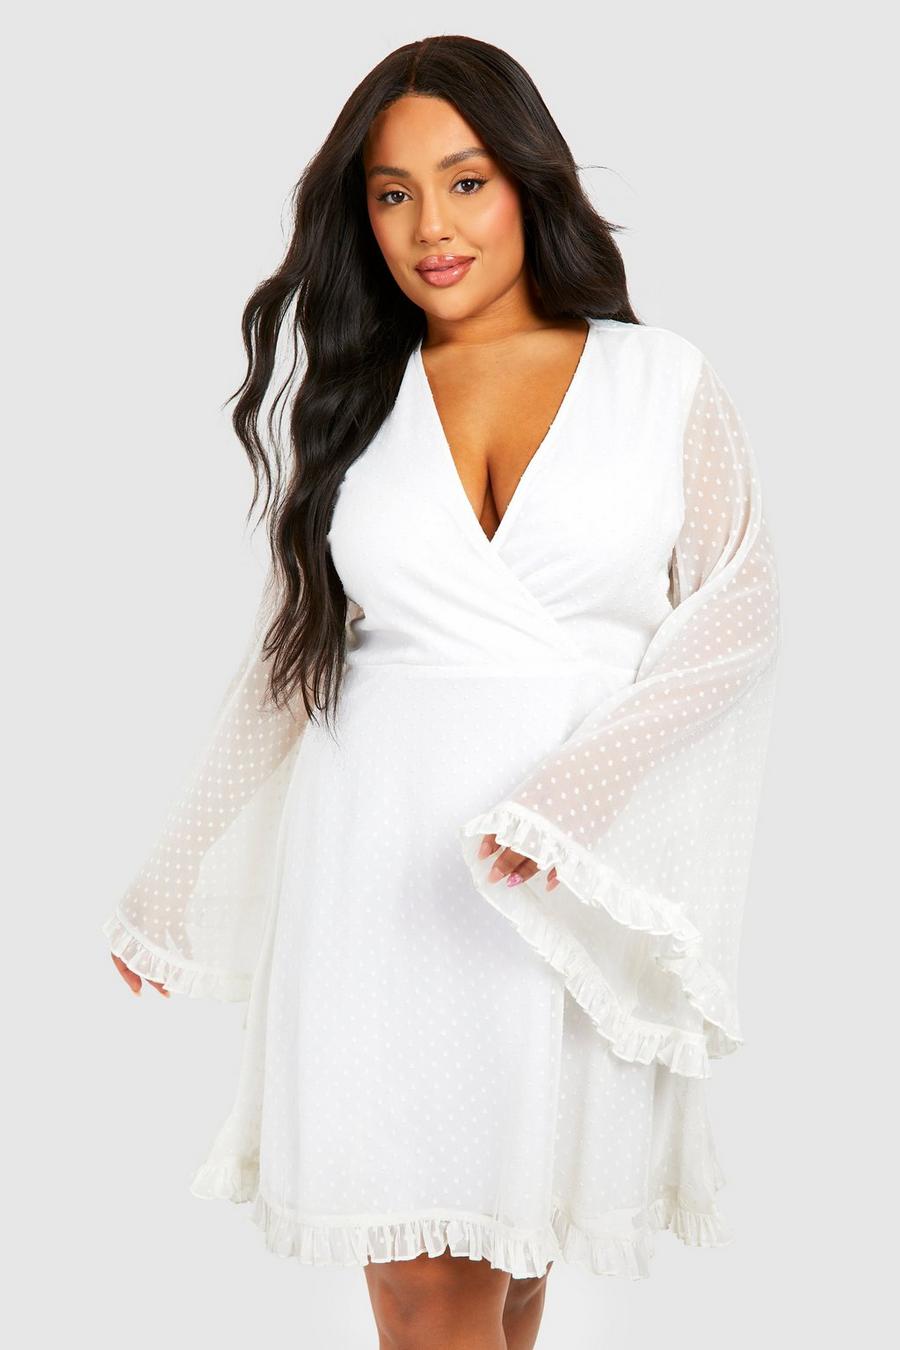 Grande taille - Robe patineuse en plumetis à manches larges, Ivory